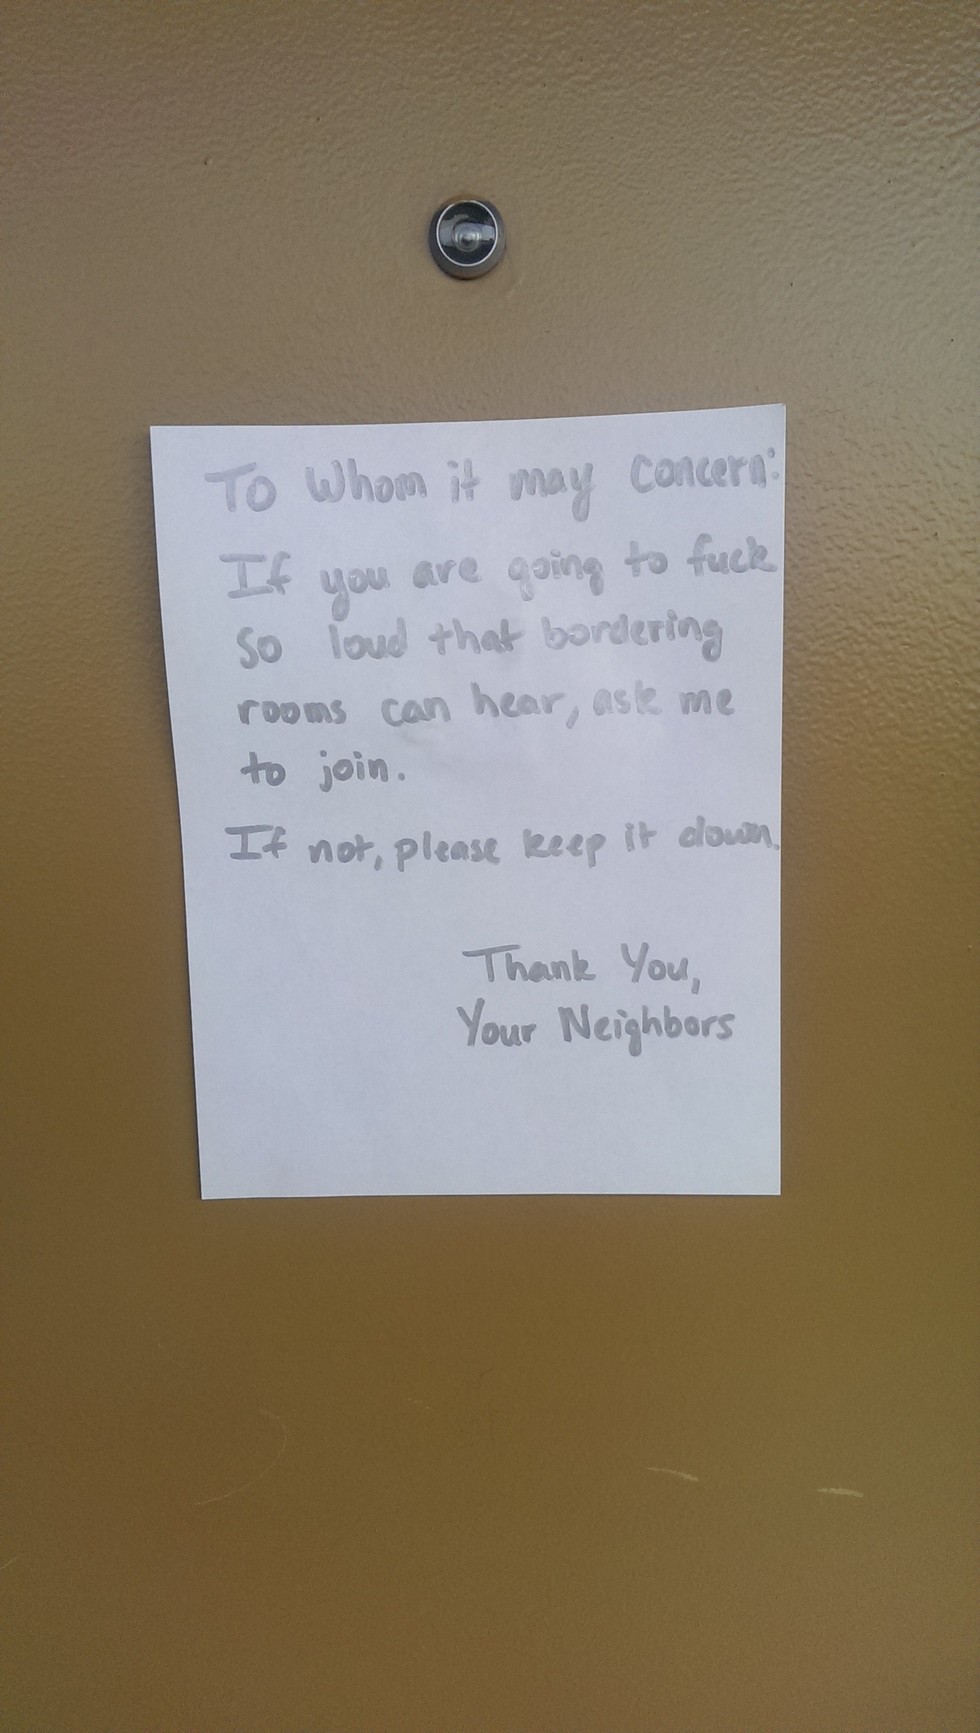 12 People Tired Of Hearing Their Neighbors Banging